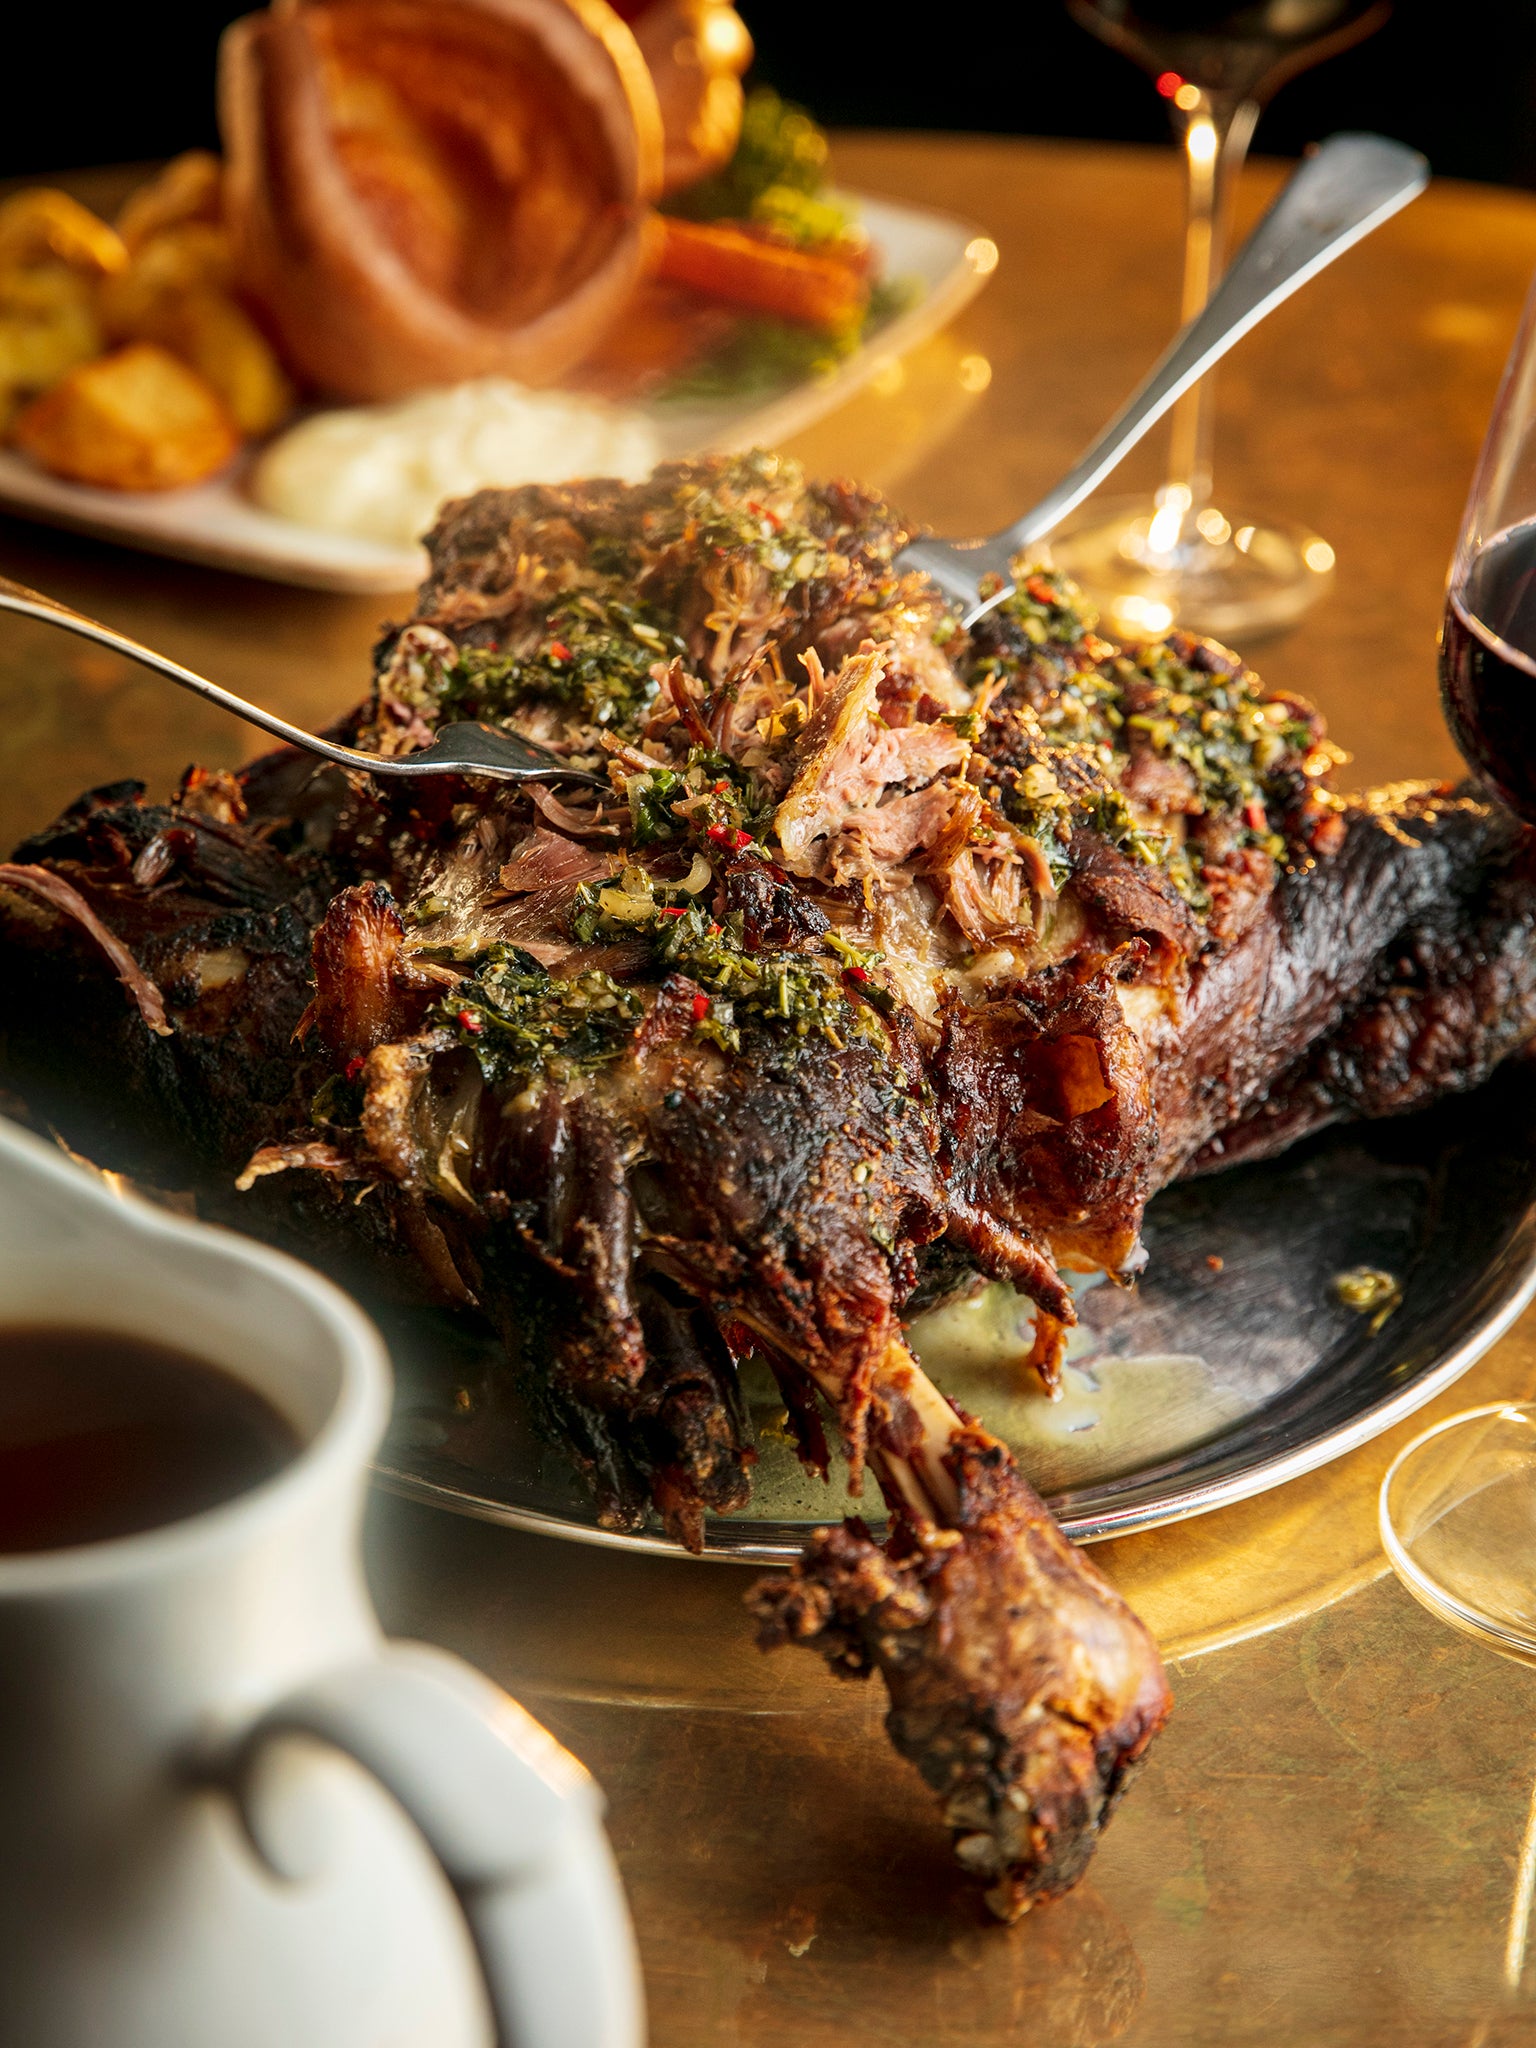 Prime perfection: juicy, tender and expertly seasoned, this roast promises Easter dining bliss